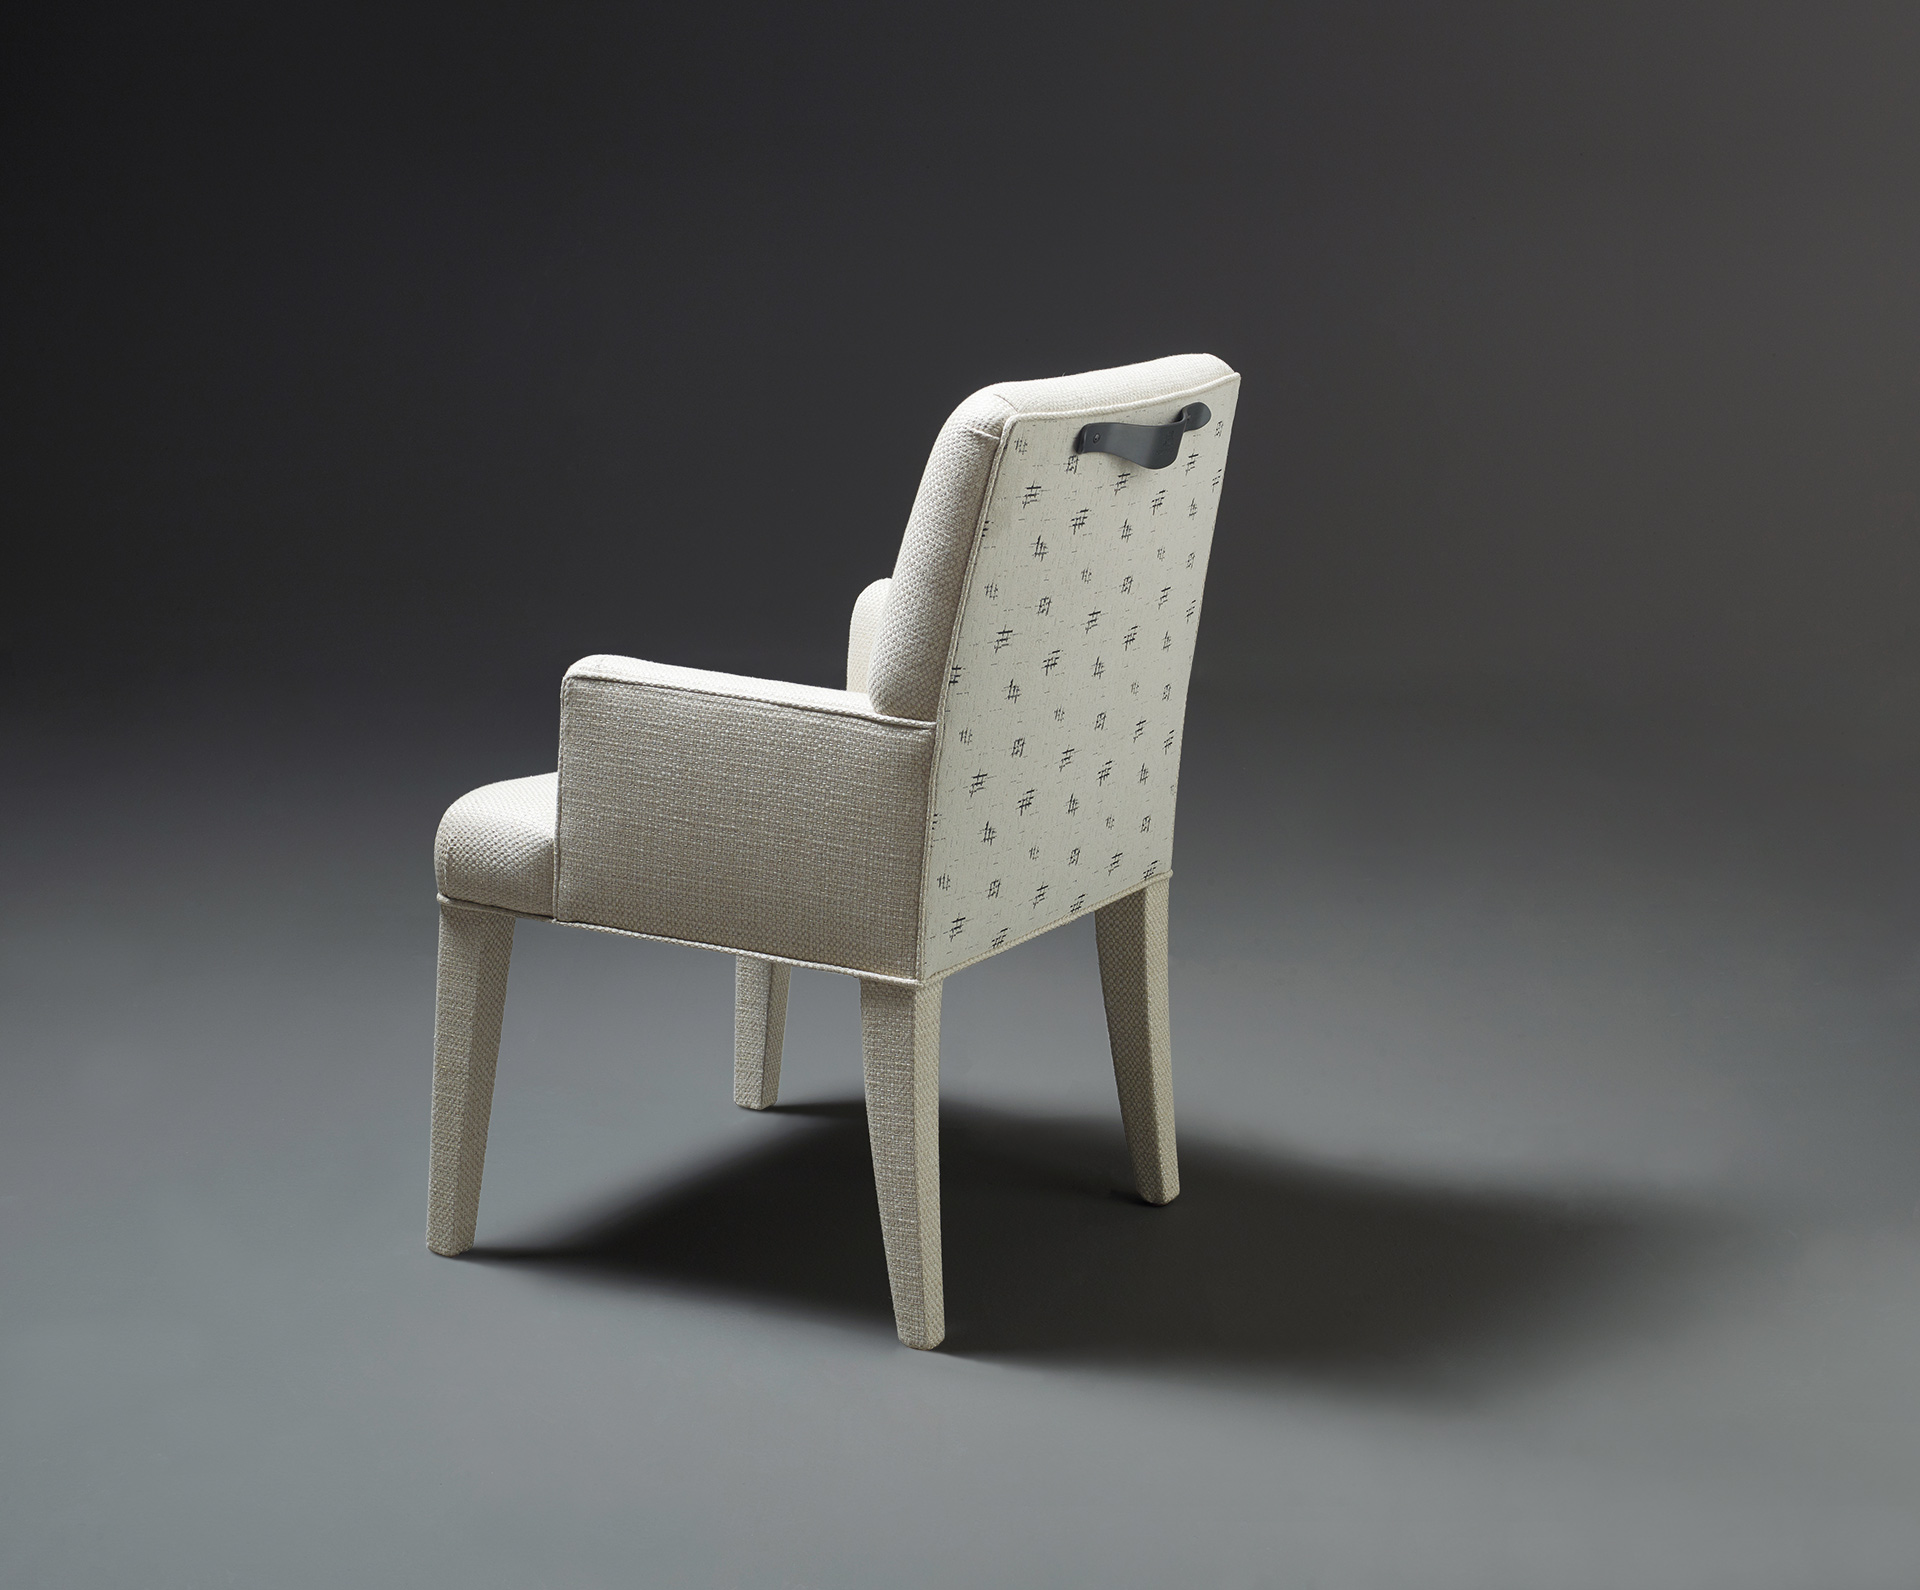 Isotta is a wooden dining chair with or without armrests and with a fabric or leather covered back, from Promemoria's catalogue | Promemoria